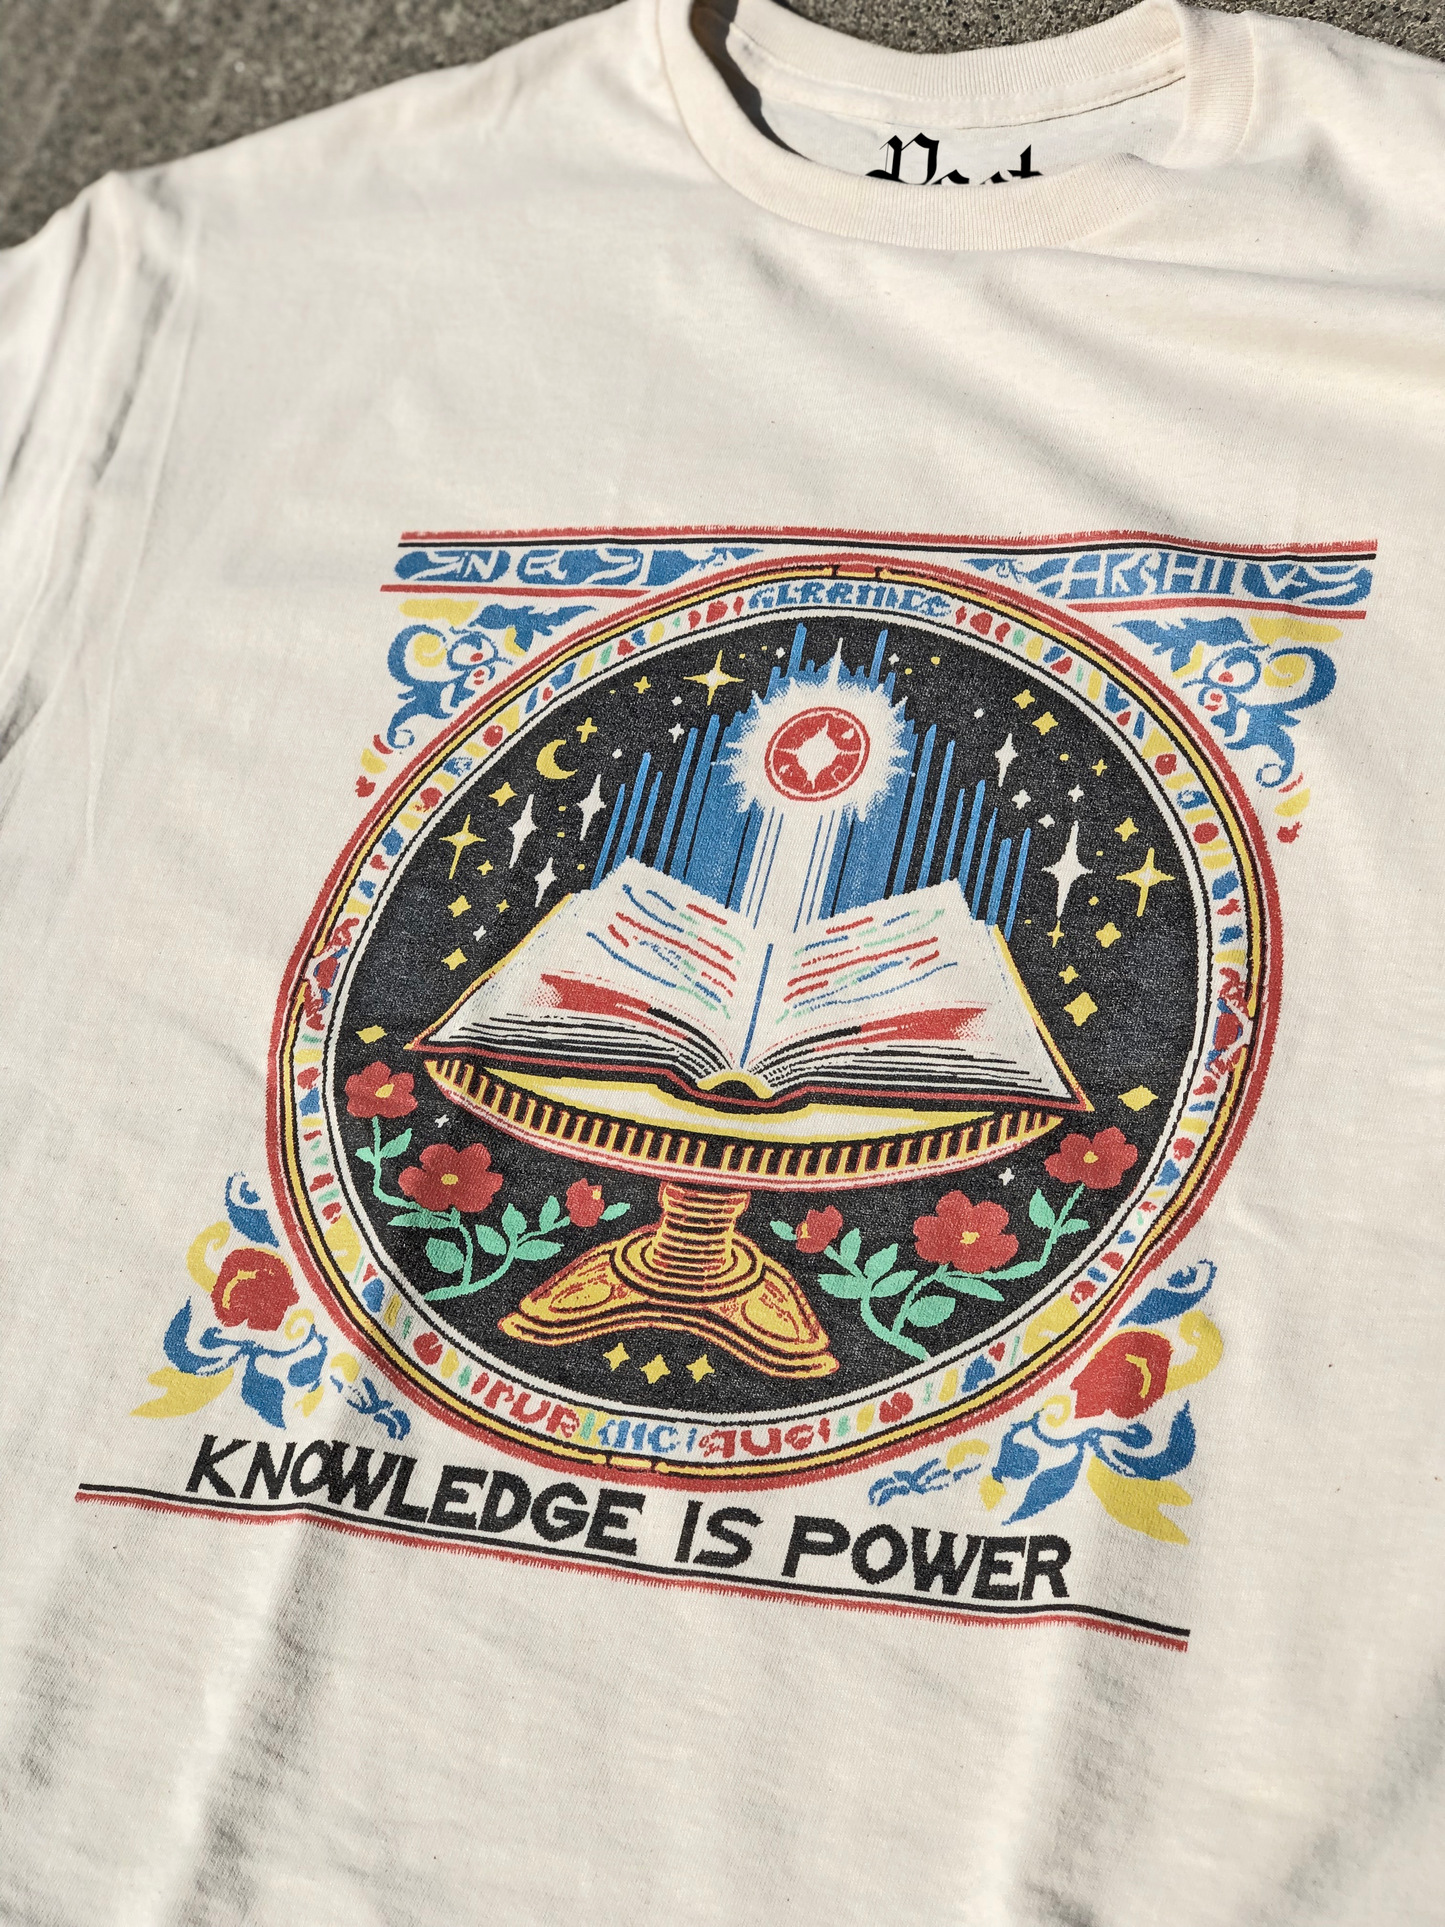 Knowledge Is Power T-Shirt - Poet Archives